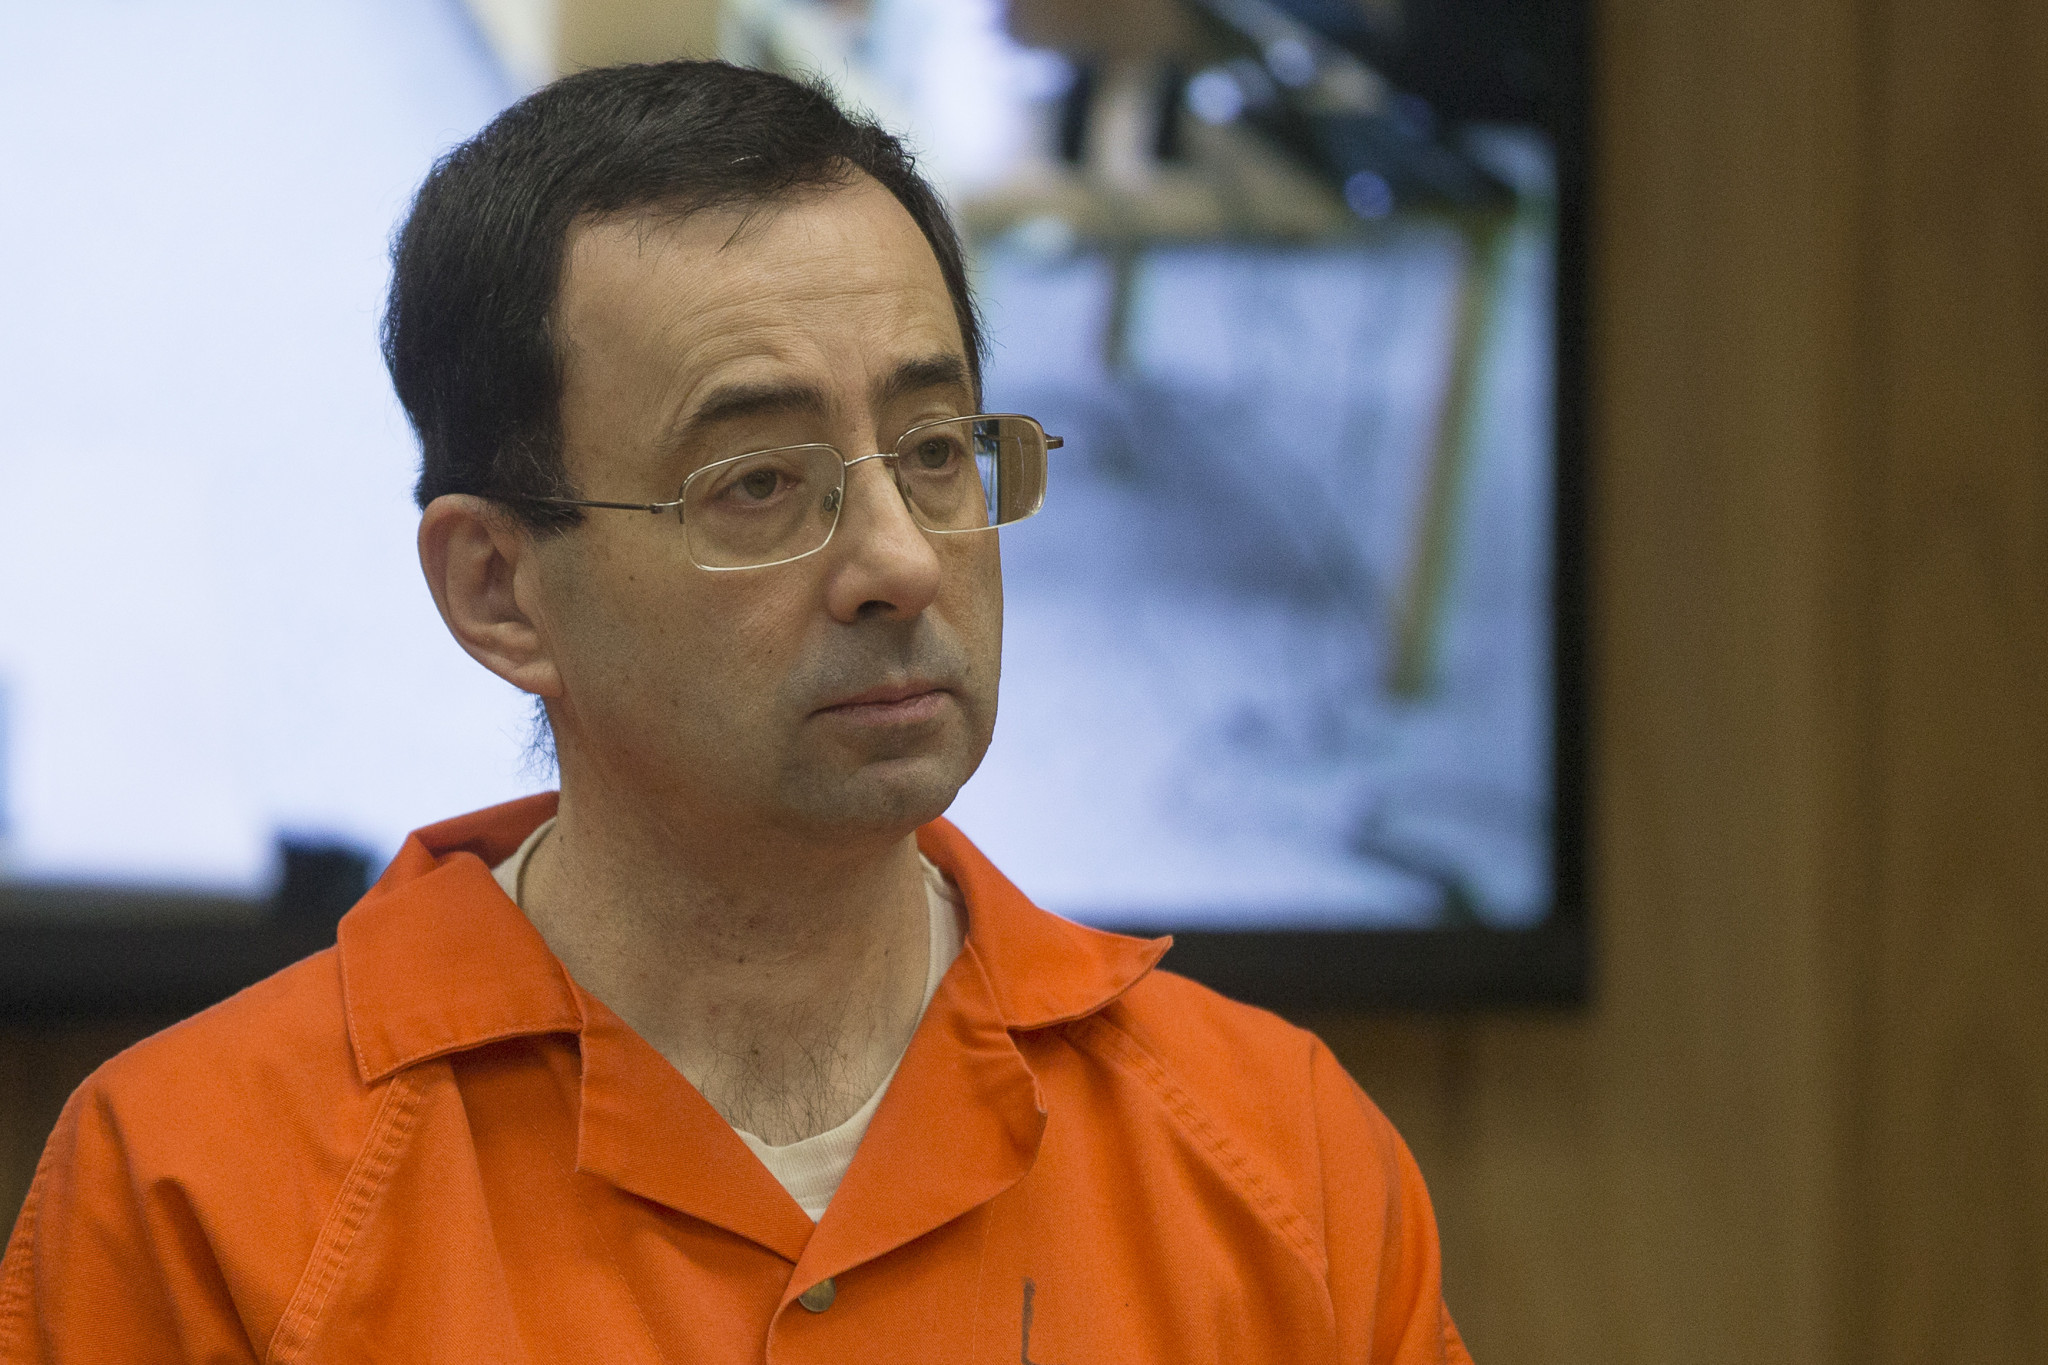 Larry Nassar was found guilty of sexually abusing dozens of American gymnasts under the guise of medical treatment and is now serving up to 175 years in prison ©Getty Images